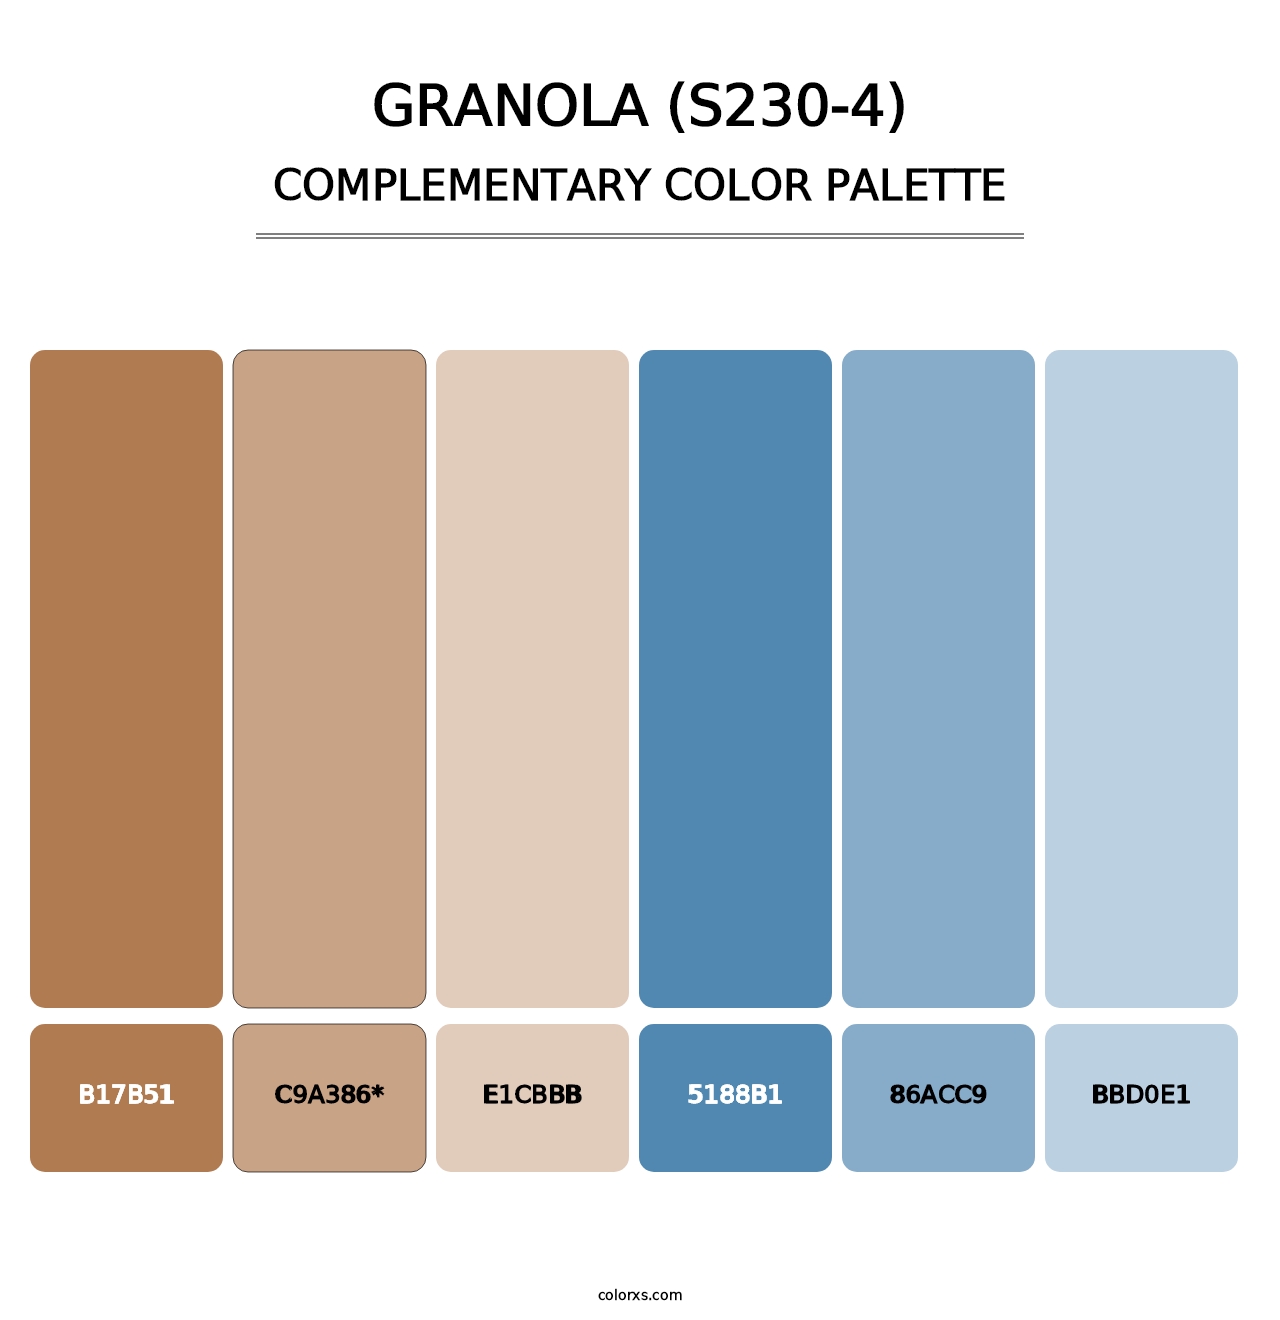 Granola (S230-4) - Complementary Color Palette